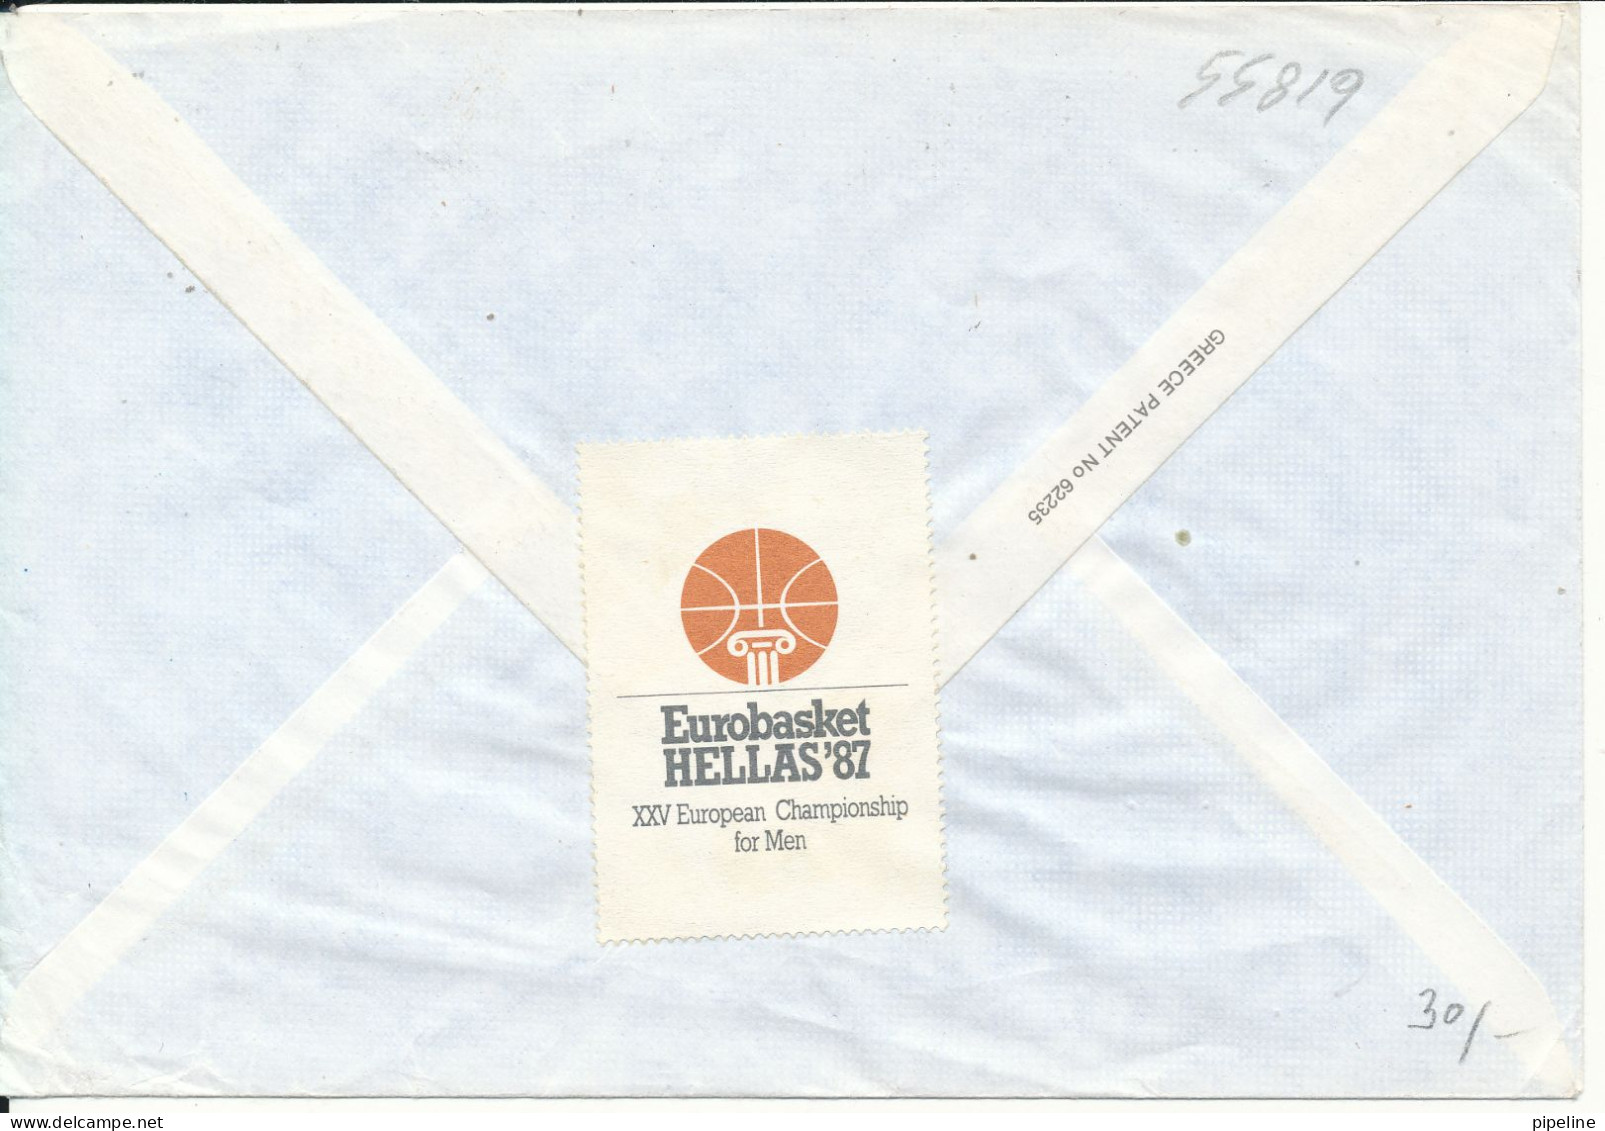 Greece Air Mail Cover Sent To Sweden 3-10-1987 See The BASKETBALL Label On The Backside Of The Cover - Athos Berg